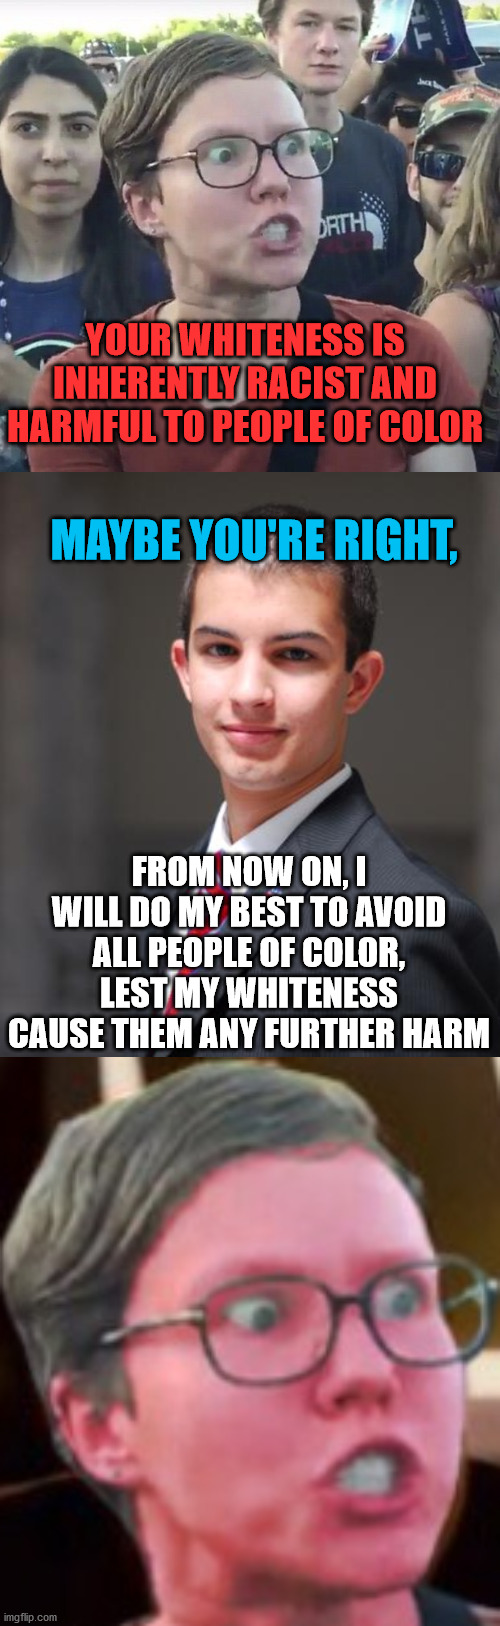 My response to anyone who thinks this way | YOUR WHITENESS IS INHERENTLY RACIST AND HARMFUL TO PEOPLE OF COLOR; MAYBE YOU'RE RIGHT, FROM NOW ON, I WILL DO MY BEST TO AVOID ALL PEOPLE OF COLOR, LEST MY WHITENESS CAUSE THEM ANY FURTHER HARM | image tagged in college conservative,leftist,white people,racist,red,triggered | made w/ Imgflip meme maker